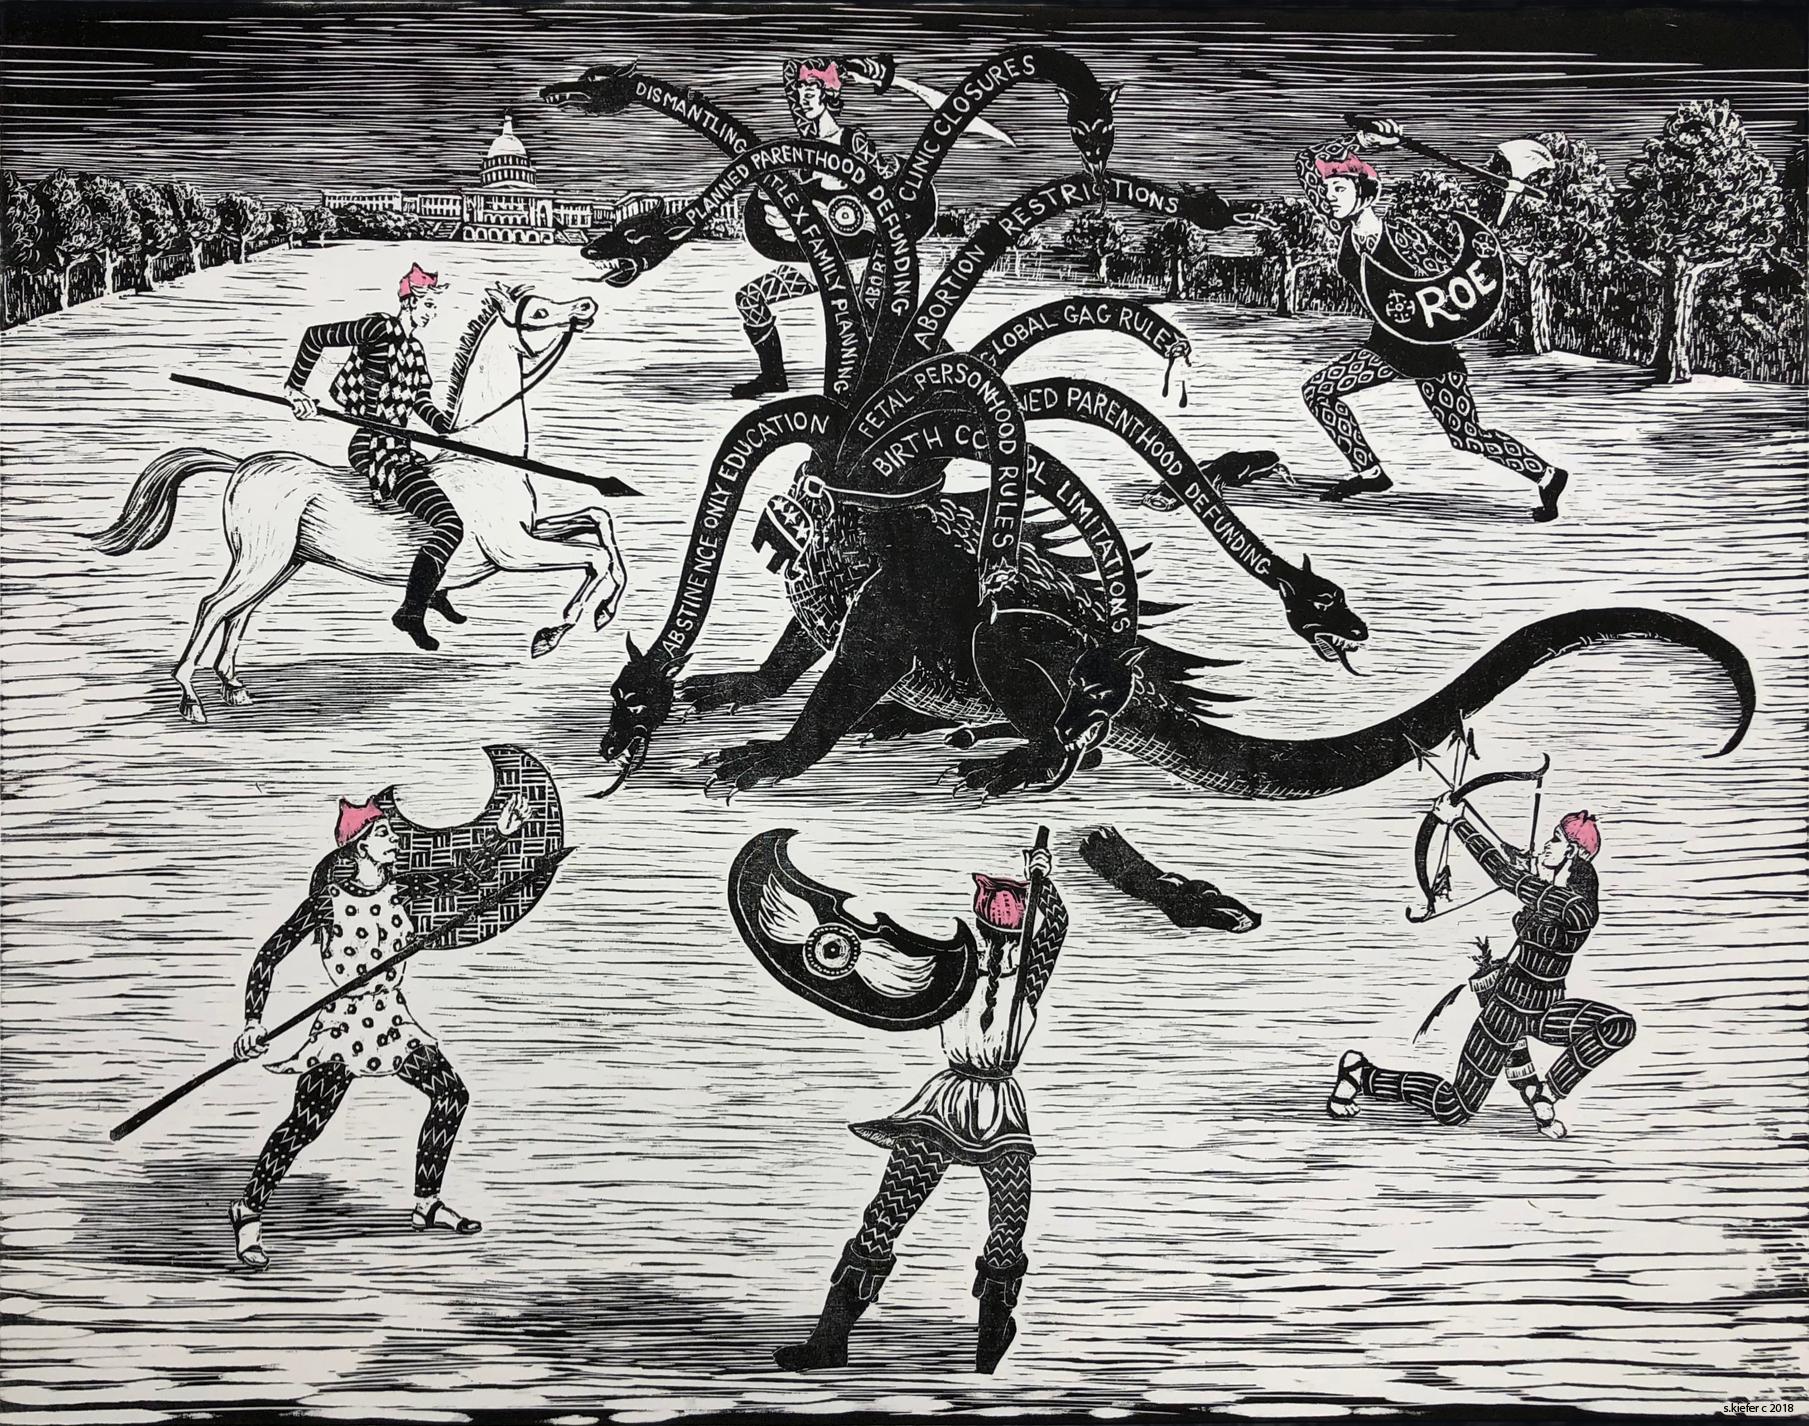 Susan Kiefer Figurative Print - The Amazons and the Hydra (woodcut print, figurative, mythical, feminism)